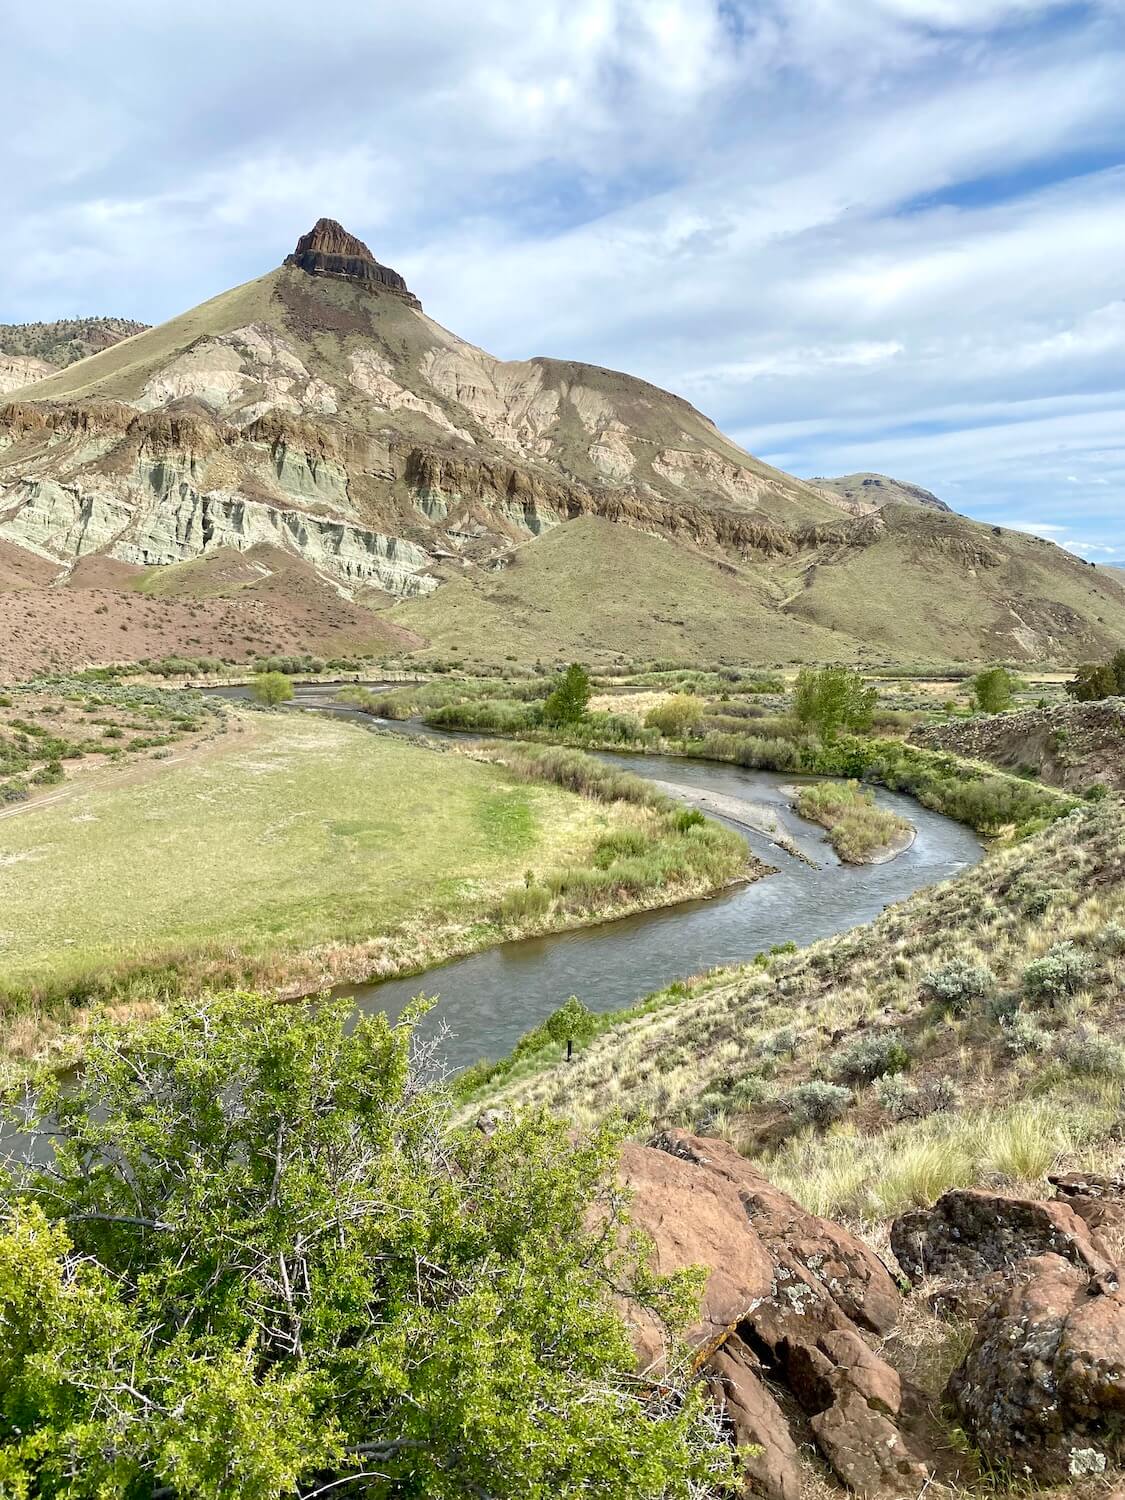 This photo shows the rocky mountain point of Sheep Rock which is in the John Day Fossil Bed National Monument.  The river flows through the photo while green farmland flows from the bank towards the rocky canyon above.